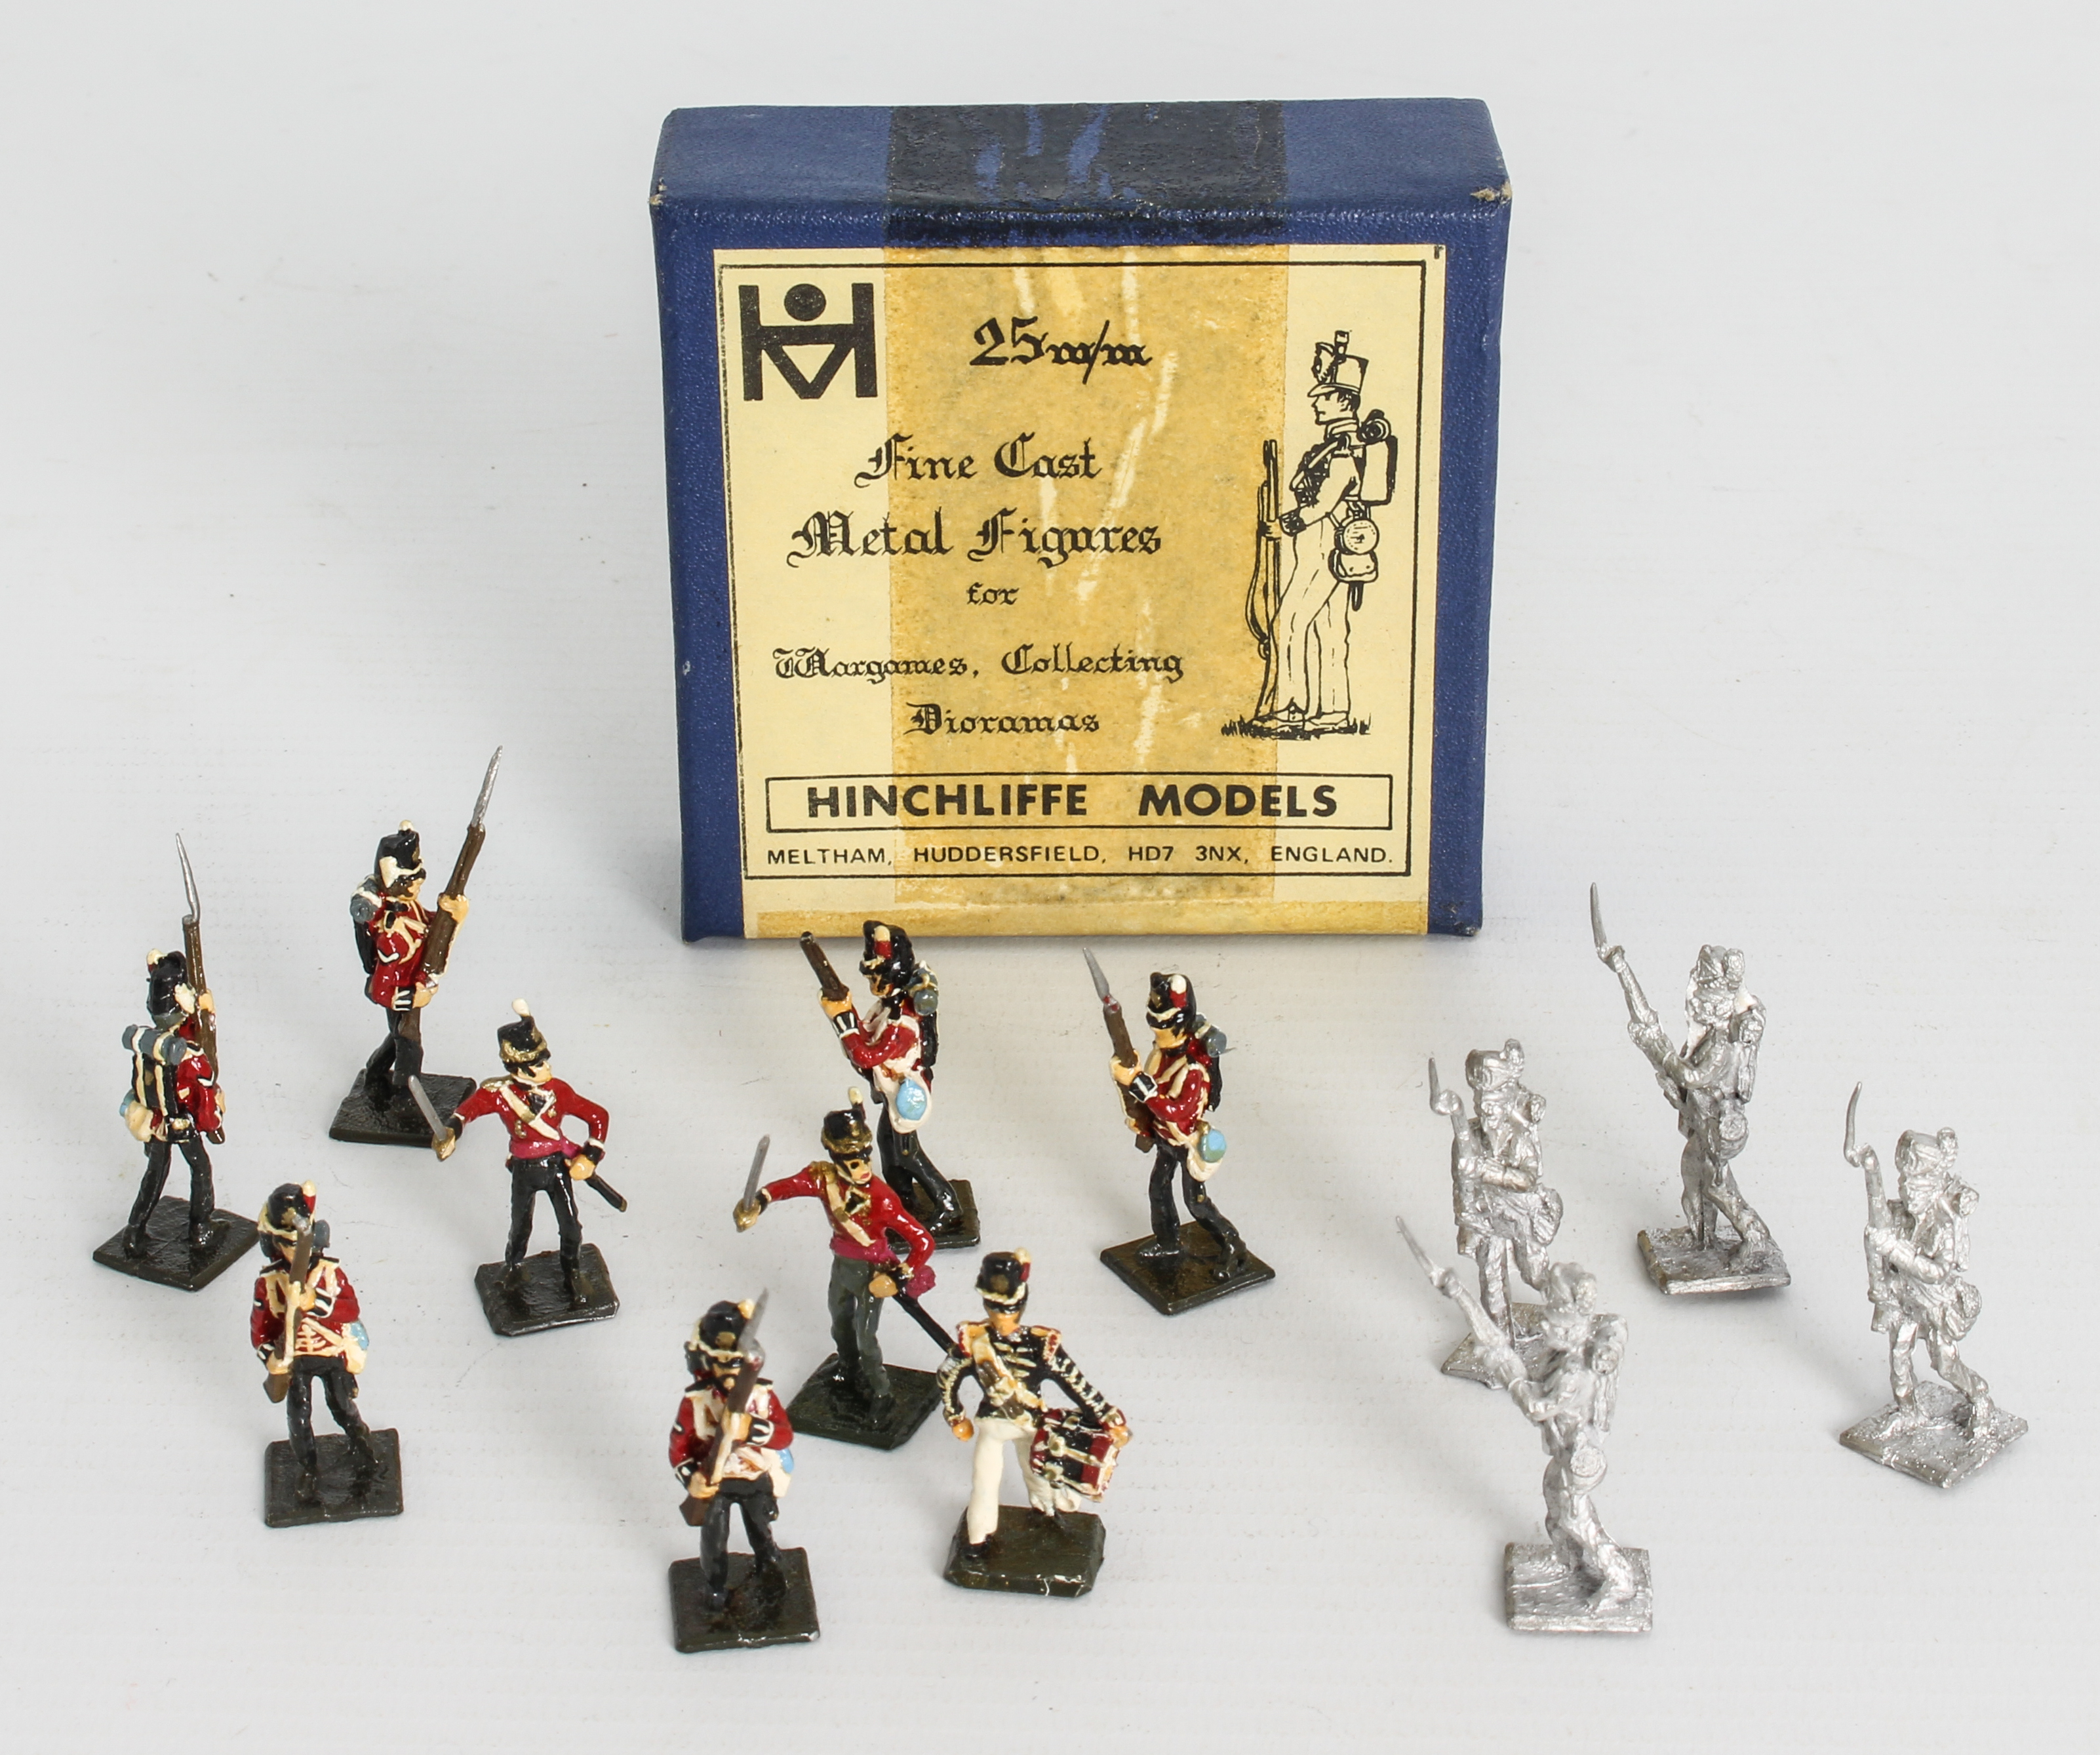 A collection of Hinchliffe Models 25mm Napoleonic era soldiers - for use in wargaming or dioramas, - Image 2 of 2